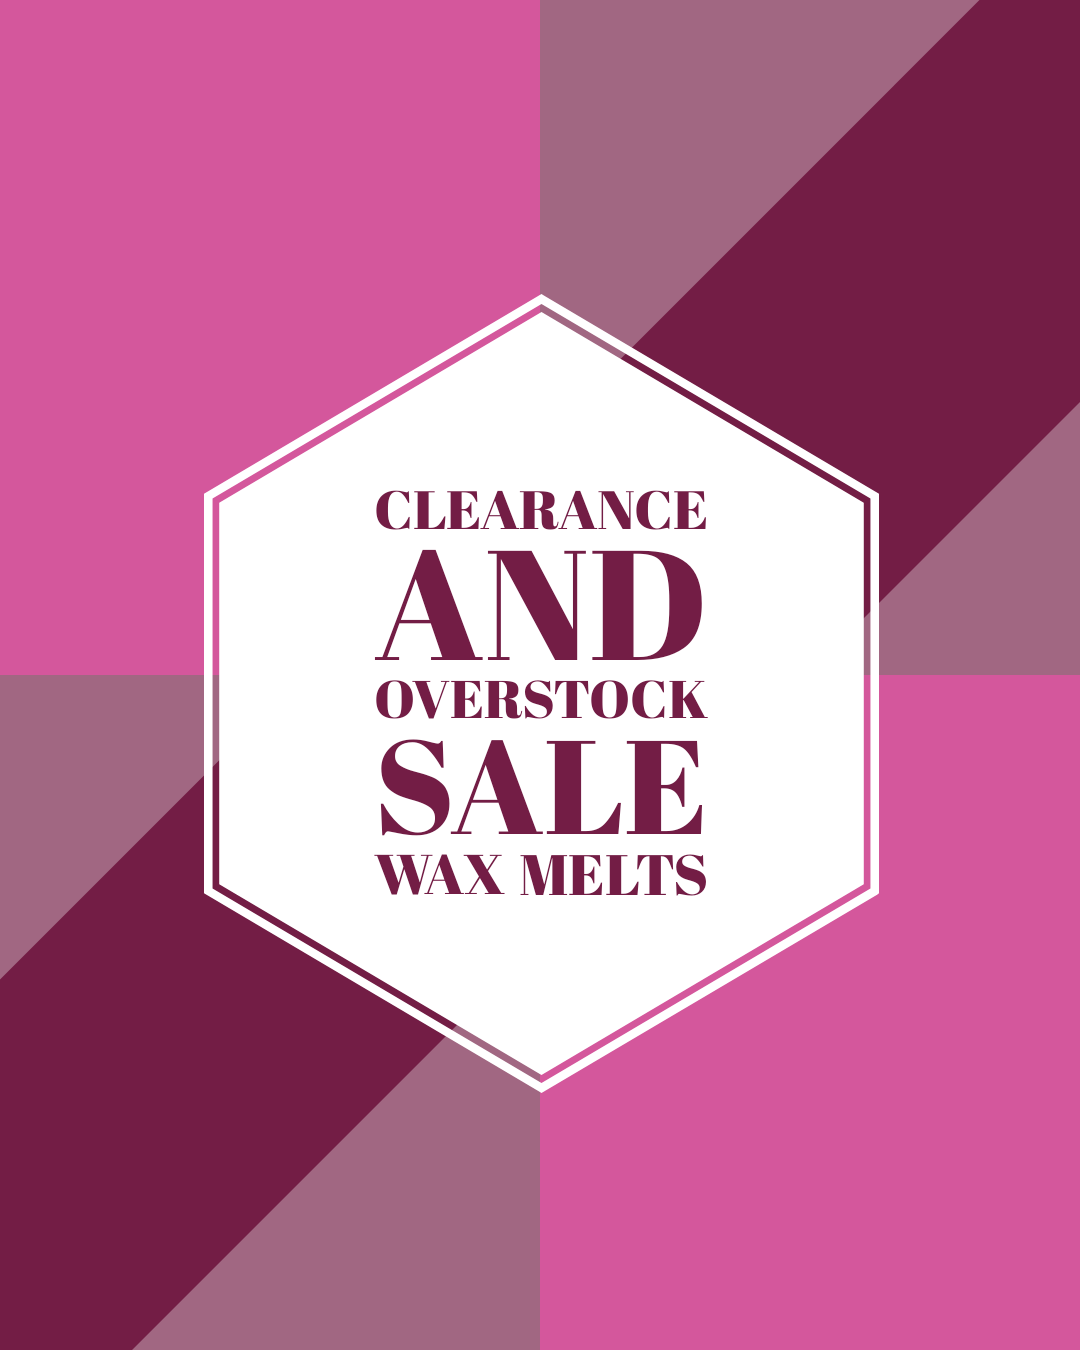 Overstock Clearance Wax Melt Sale  LIMITED QTY AVAILABLE